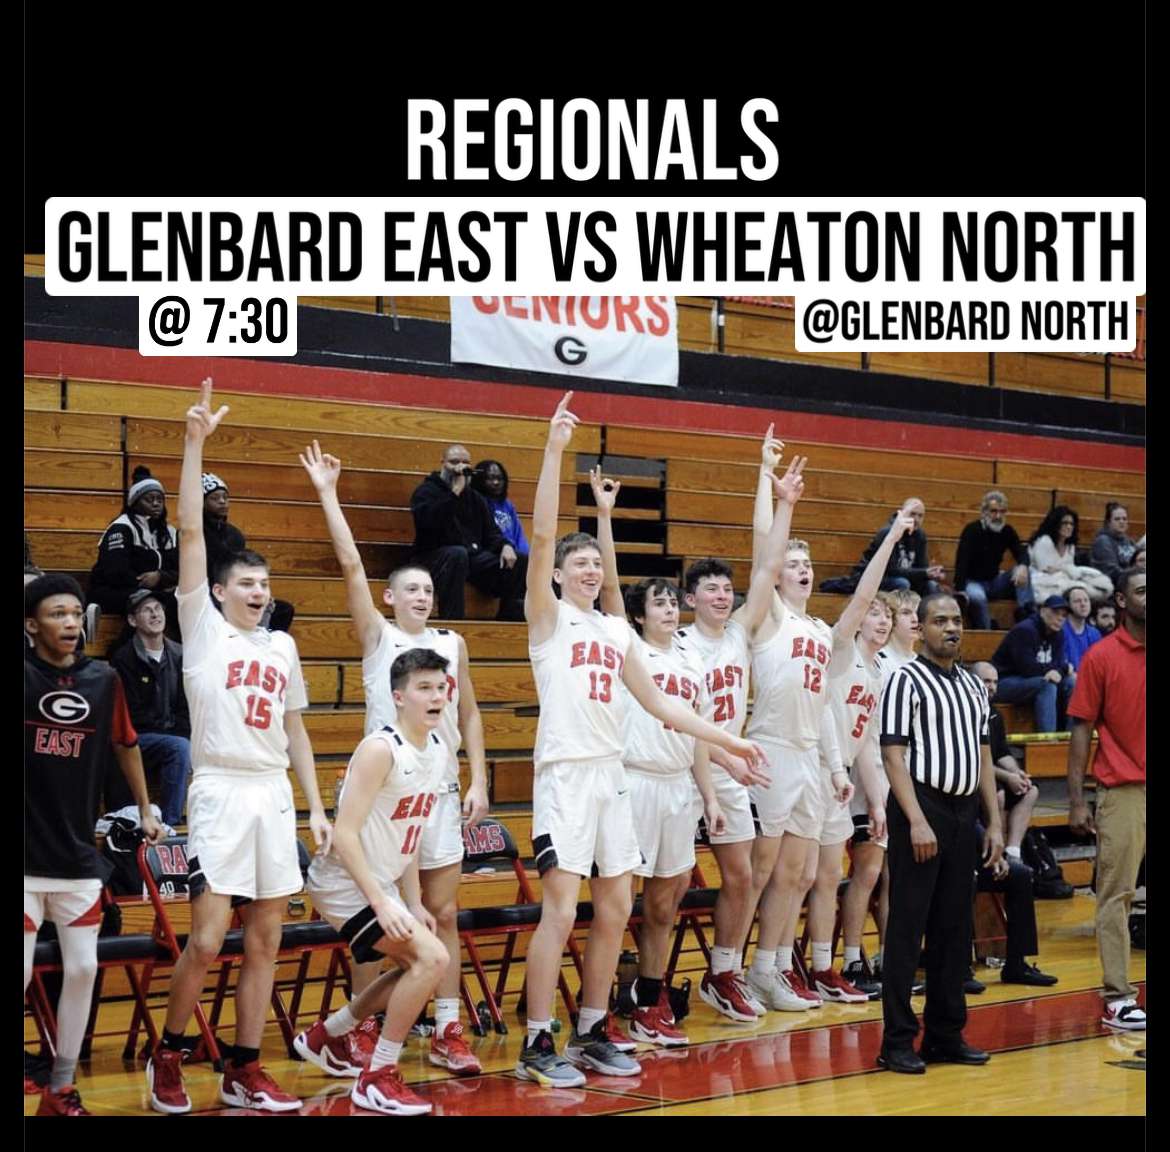 It's win or go home time. Please come support your Rams today. Let's go Rams!!! #WeAreEast